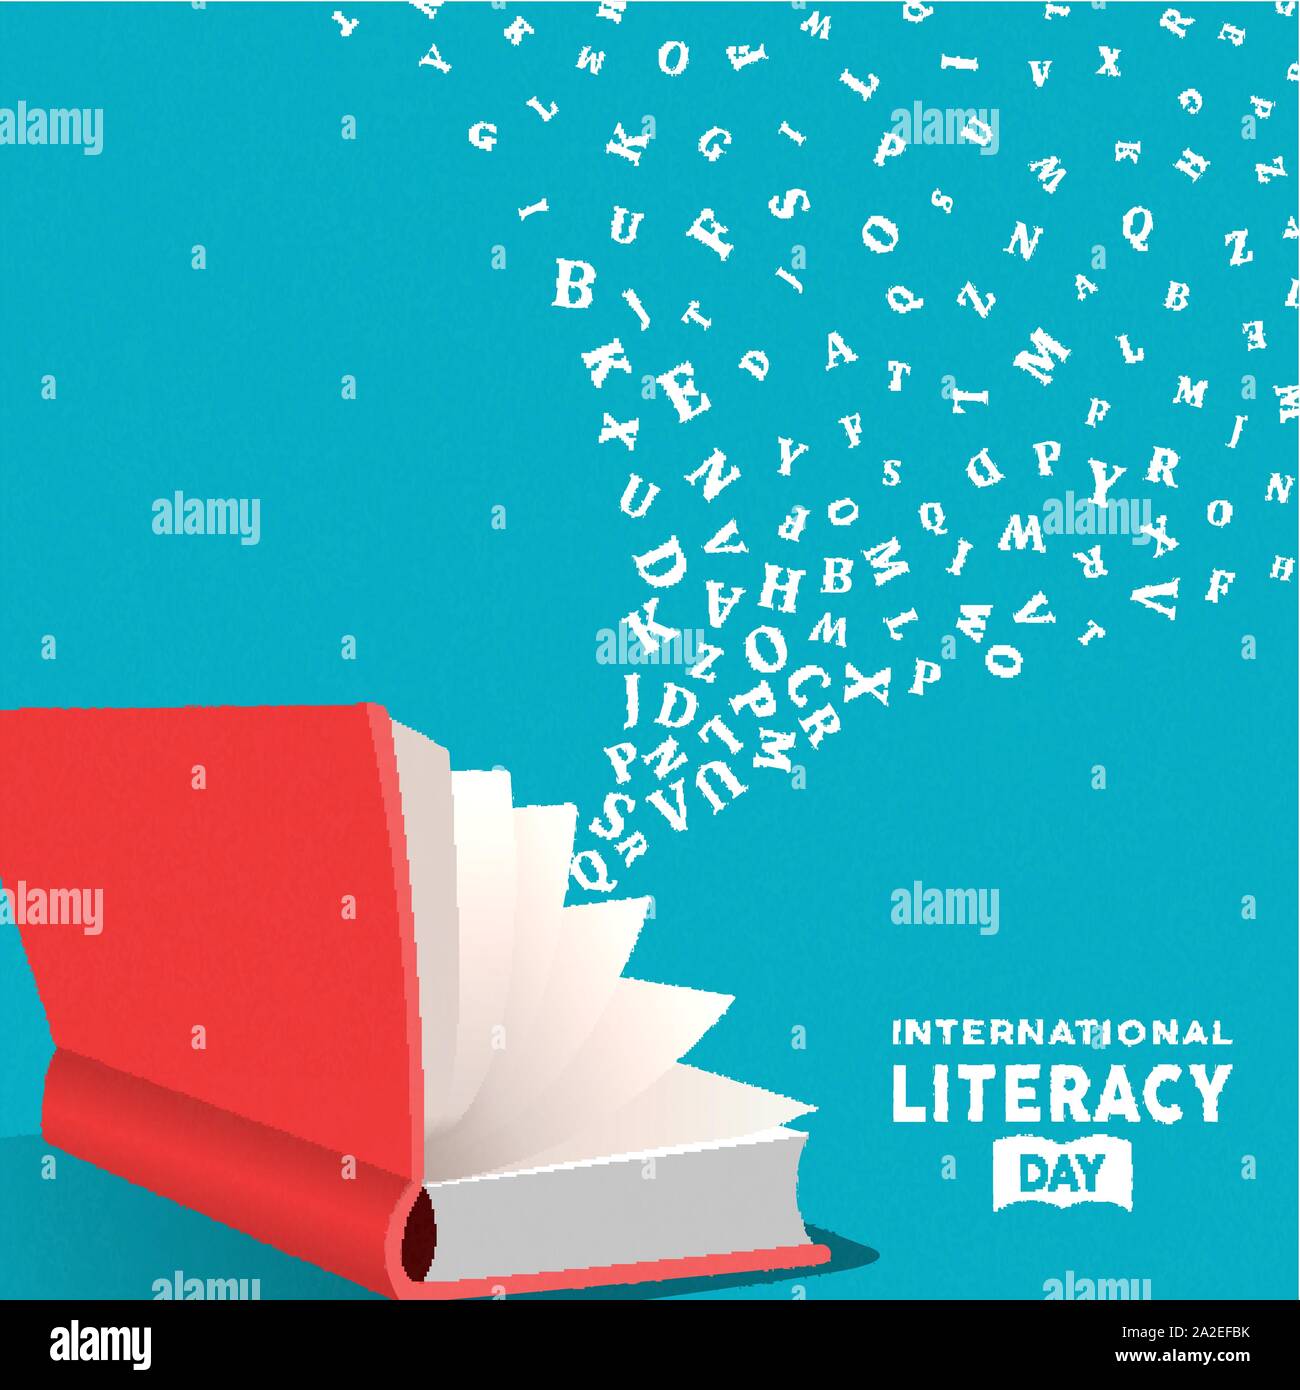 Literacy Day illustration of open book with alphabet letter symbols. Education concept for school children learning. Stock Vector